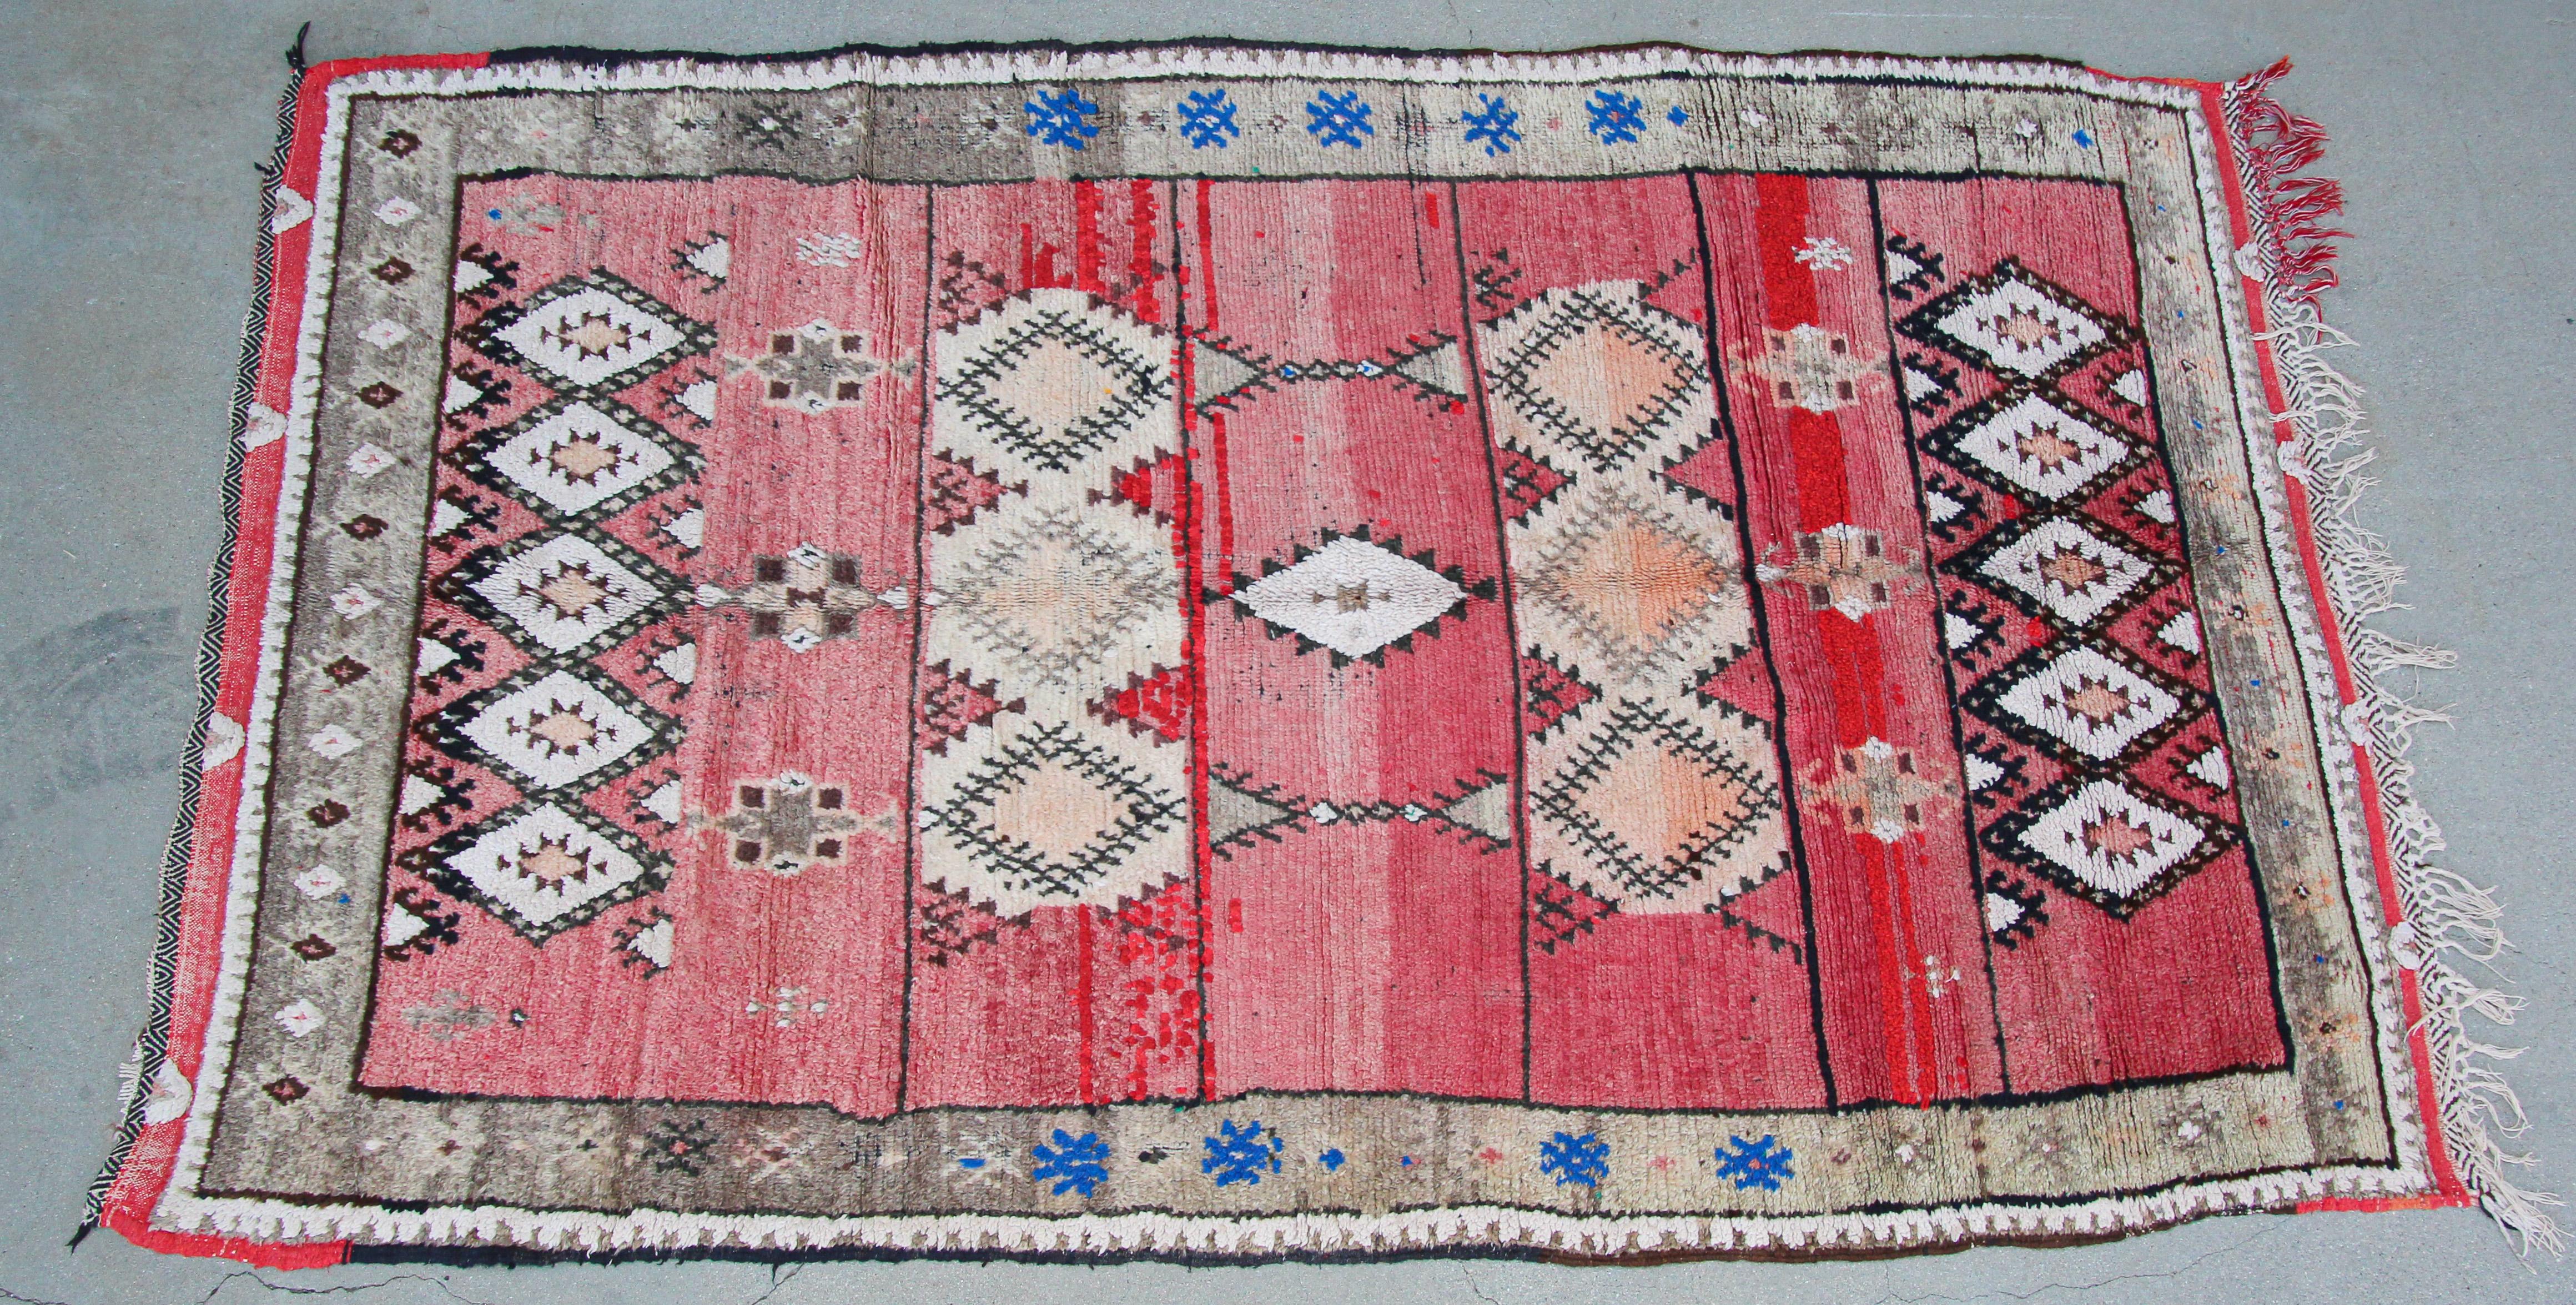 1960s Handwoven vintage Moroccan Berber Tribal Boujad rug, nicely aged with vivid cors.Beautif Boujad Moroccan hand knotted wo rug. This Moroccan rug has a mti-cor field and accent in all-over abstract patterns with different Berber and